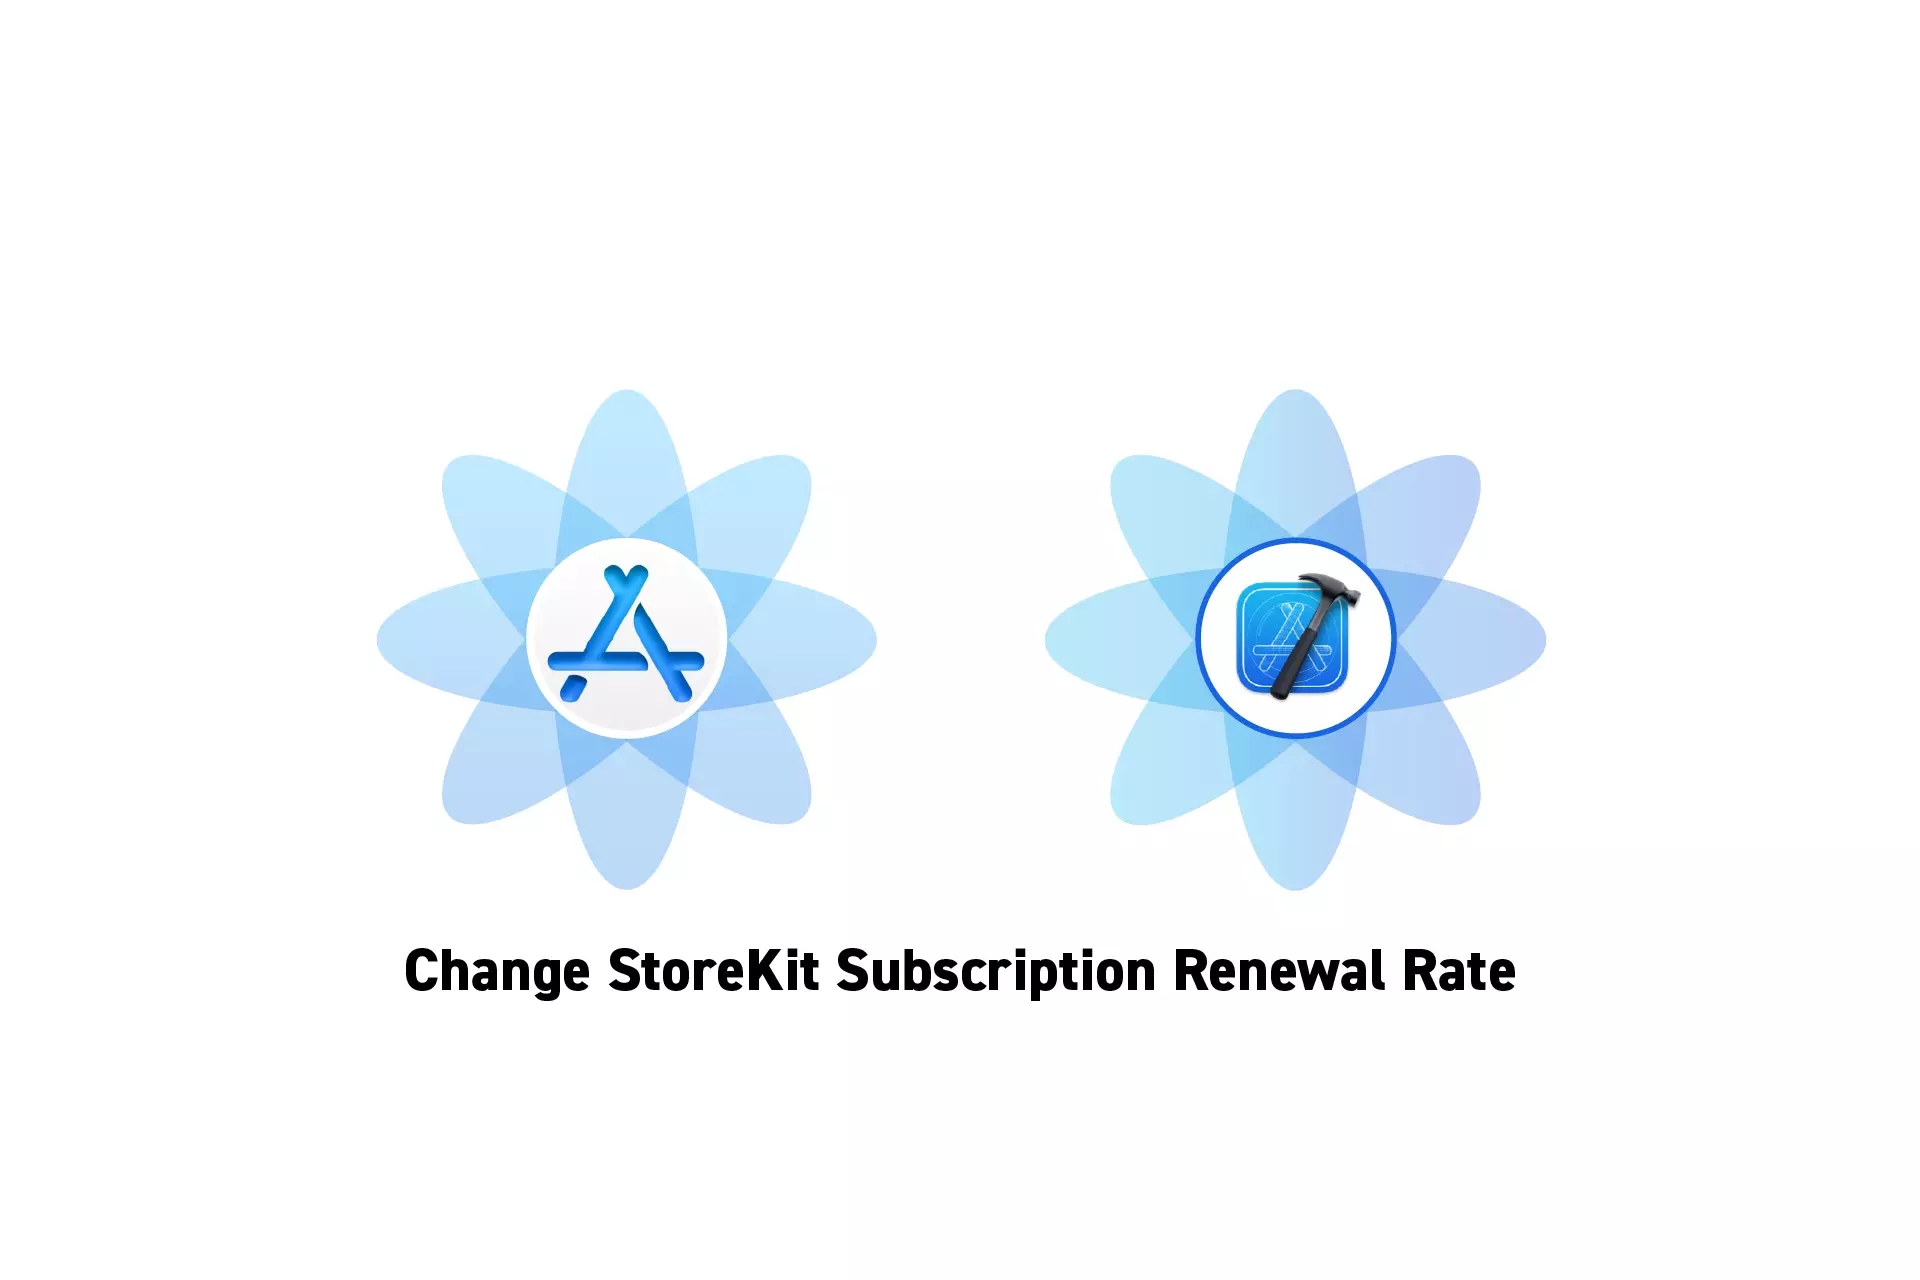 Two flowers that represent StoreKit and XCode with the text "Change StoreKit Subscription Renewal Rate" beneath them.